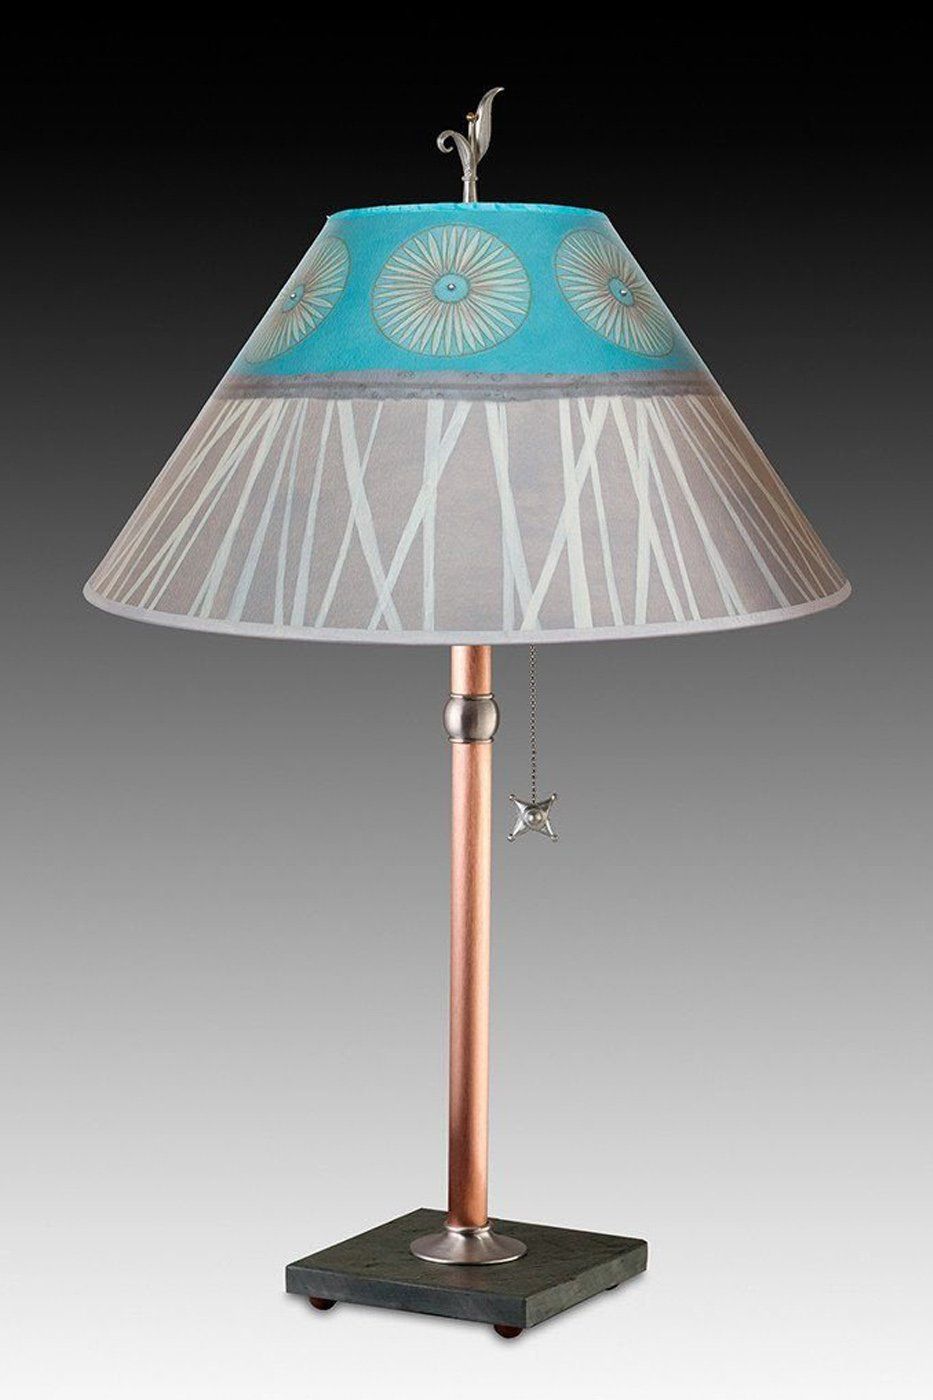 Copper Table Lamp with Large Conical Shade in Pool